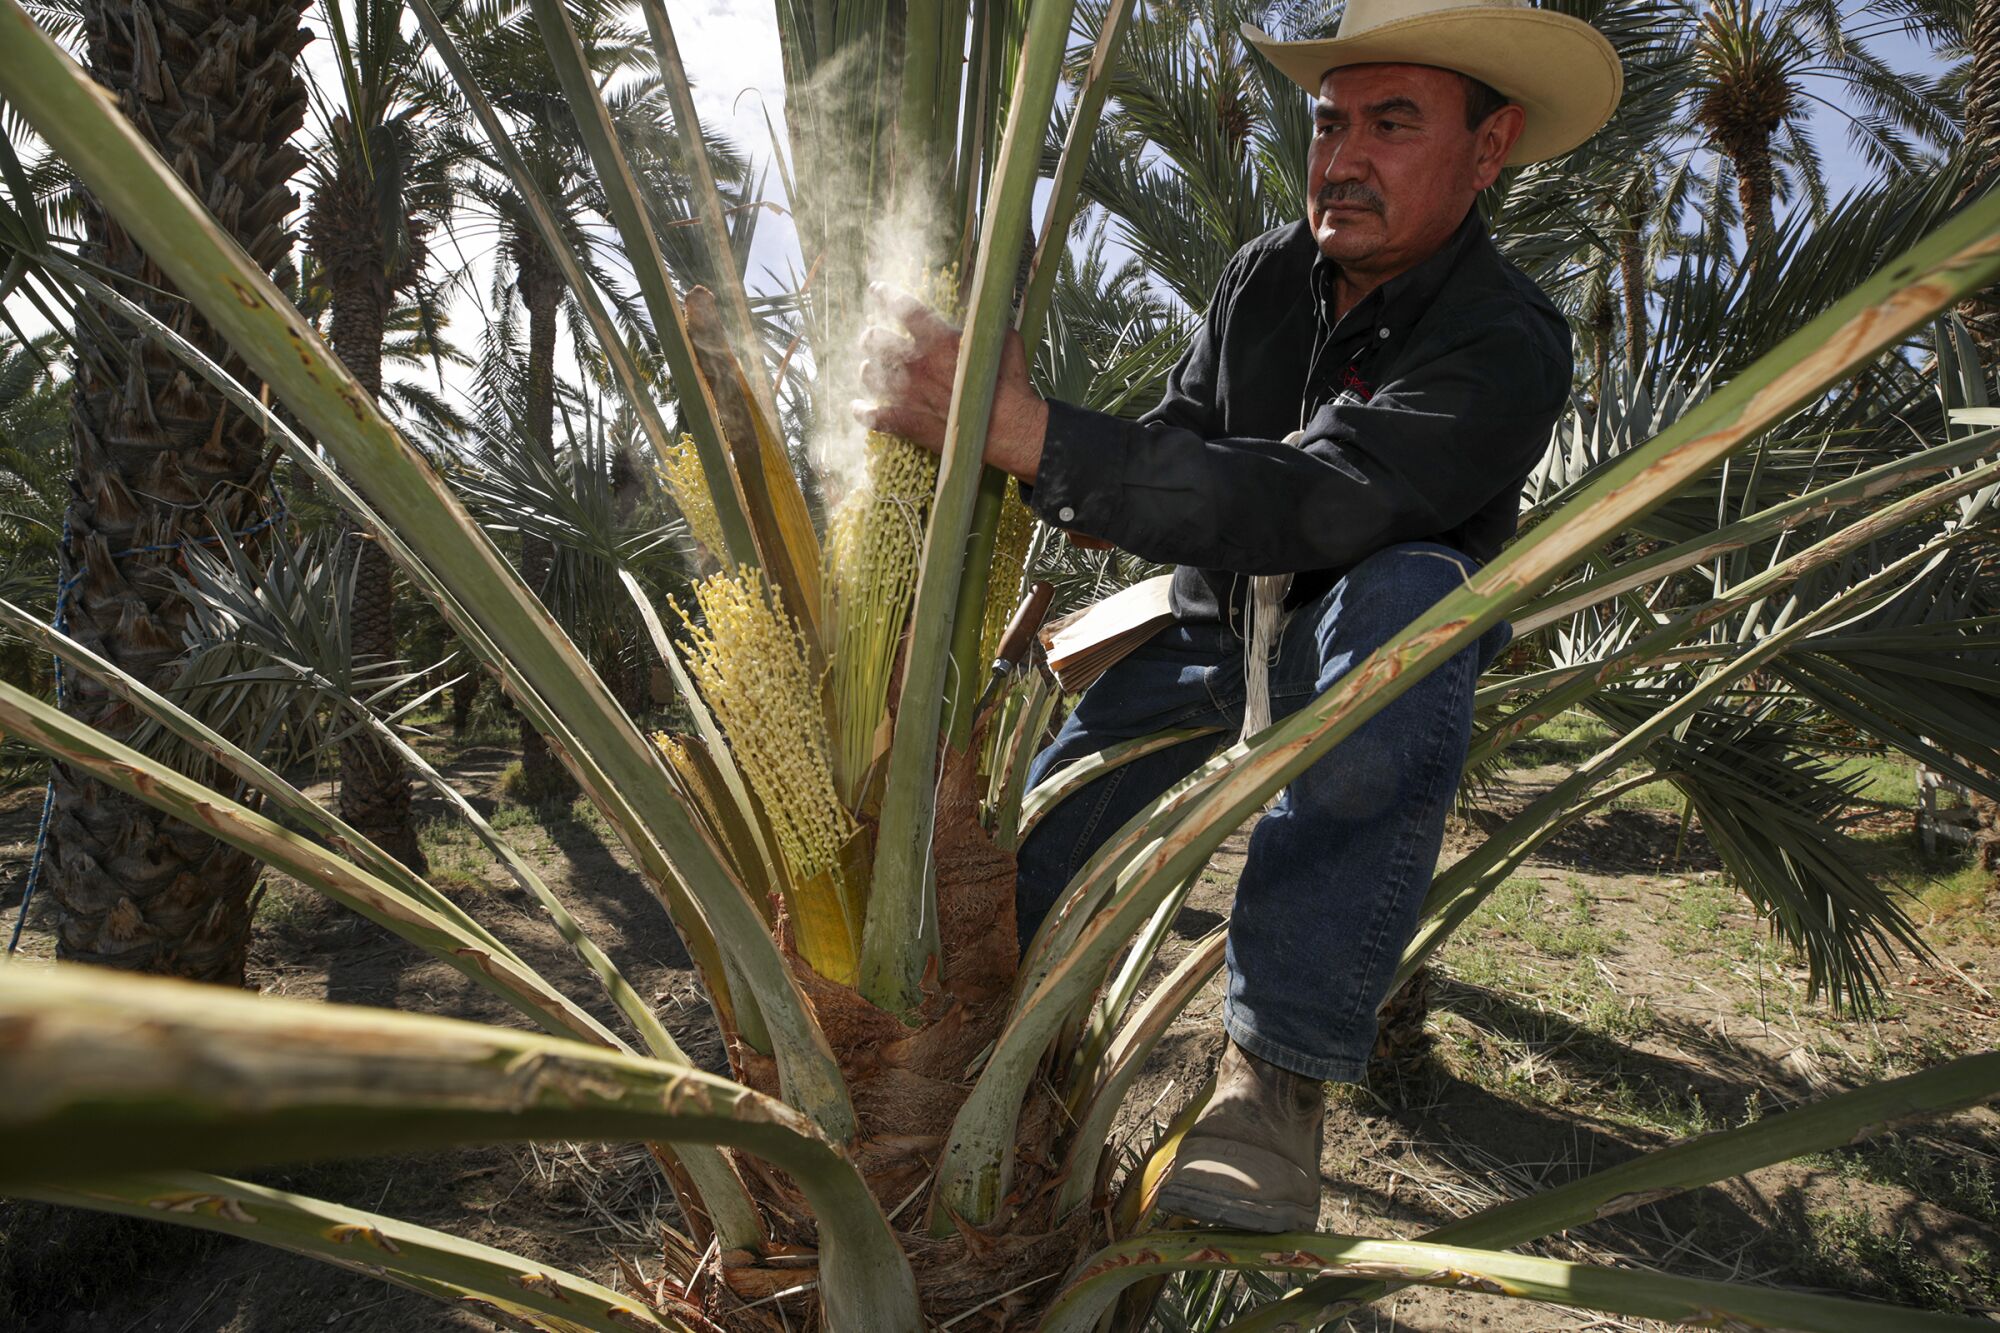 Alvaro Bautista pollinates a medjool date palm by hand at Bautista Family Organic Date Ranch in Mecca.